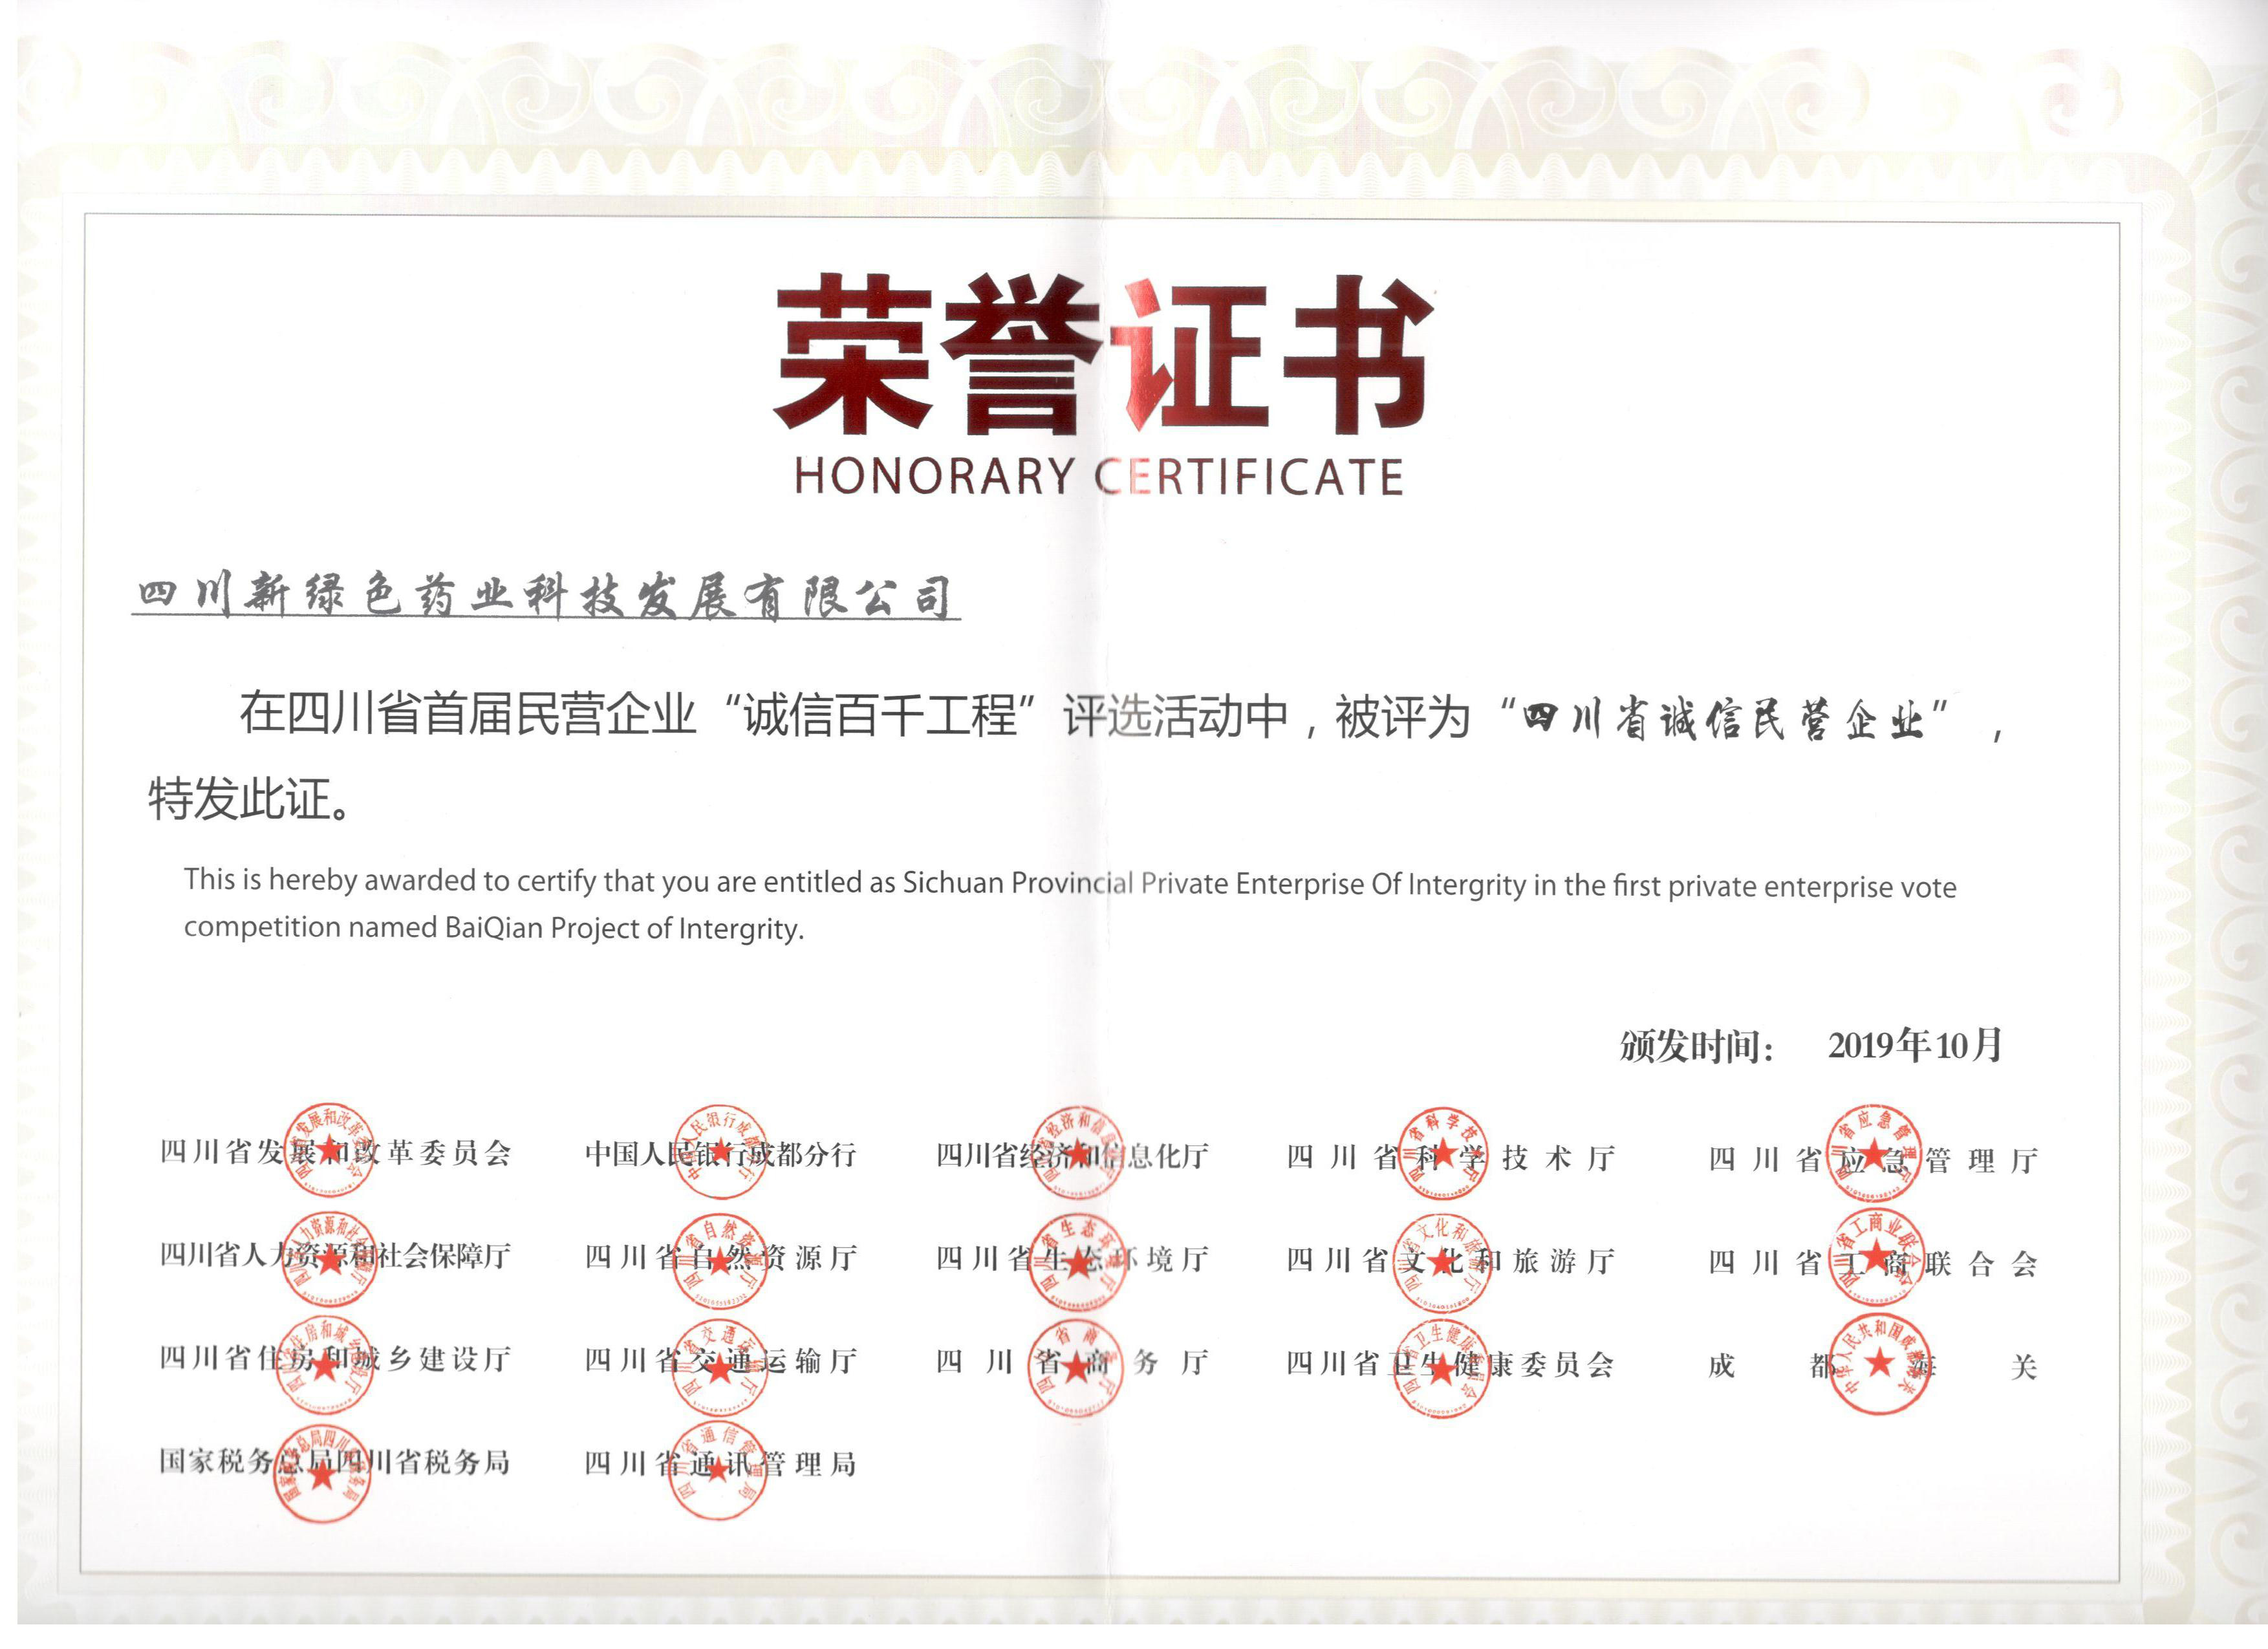 Honorary certificate of Sichuan honest private enterprise in 2019